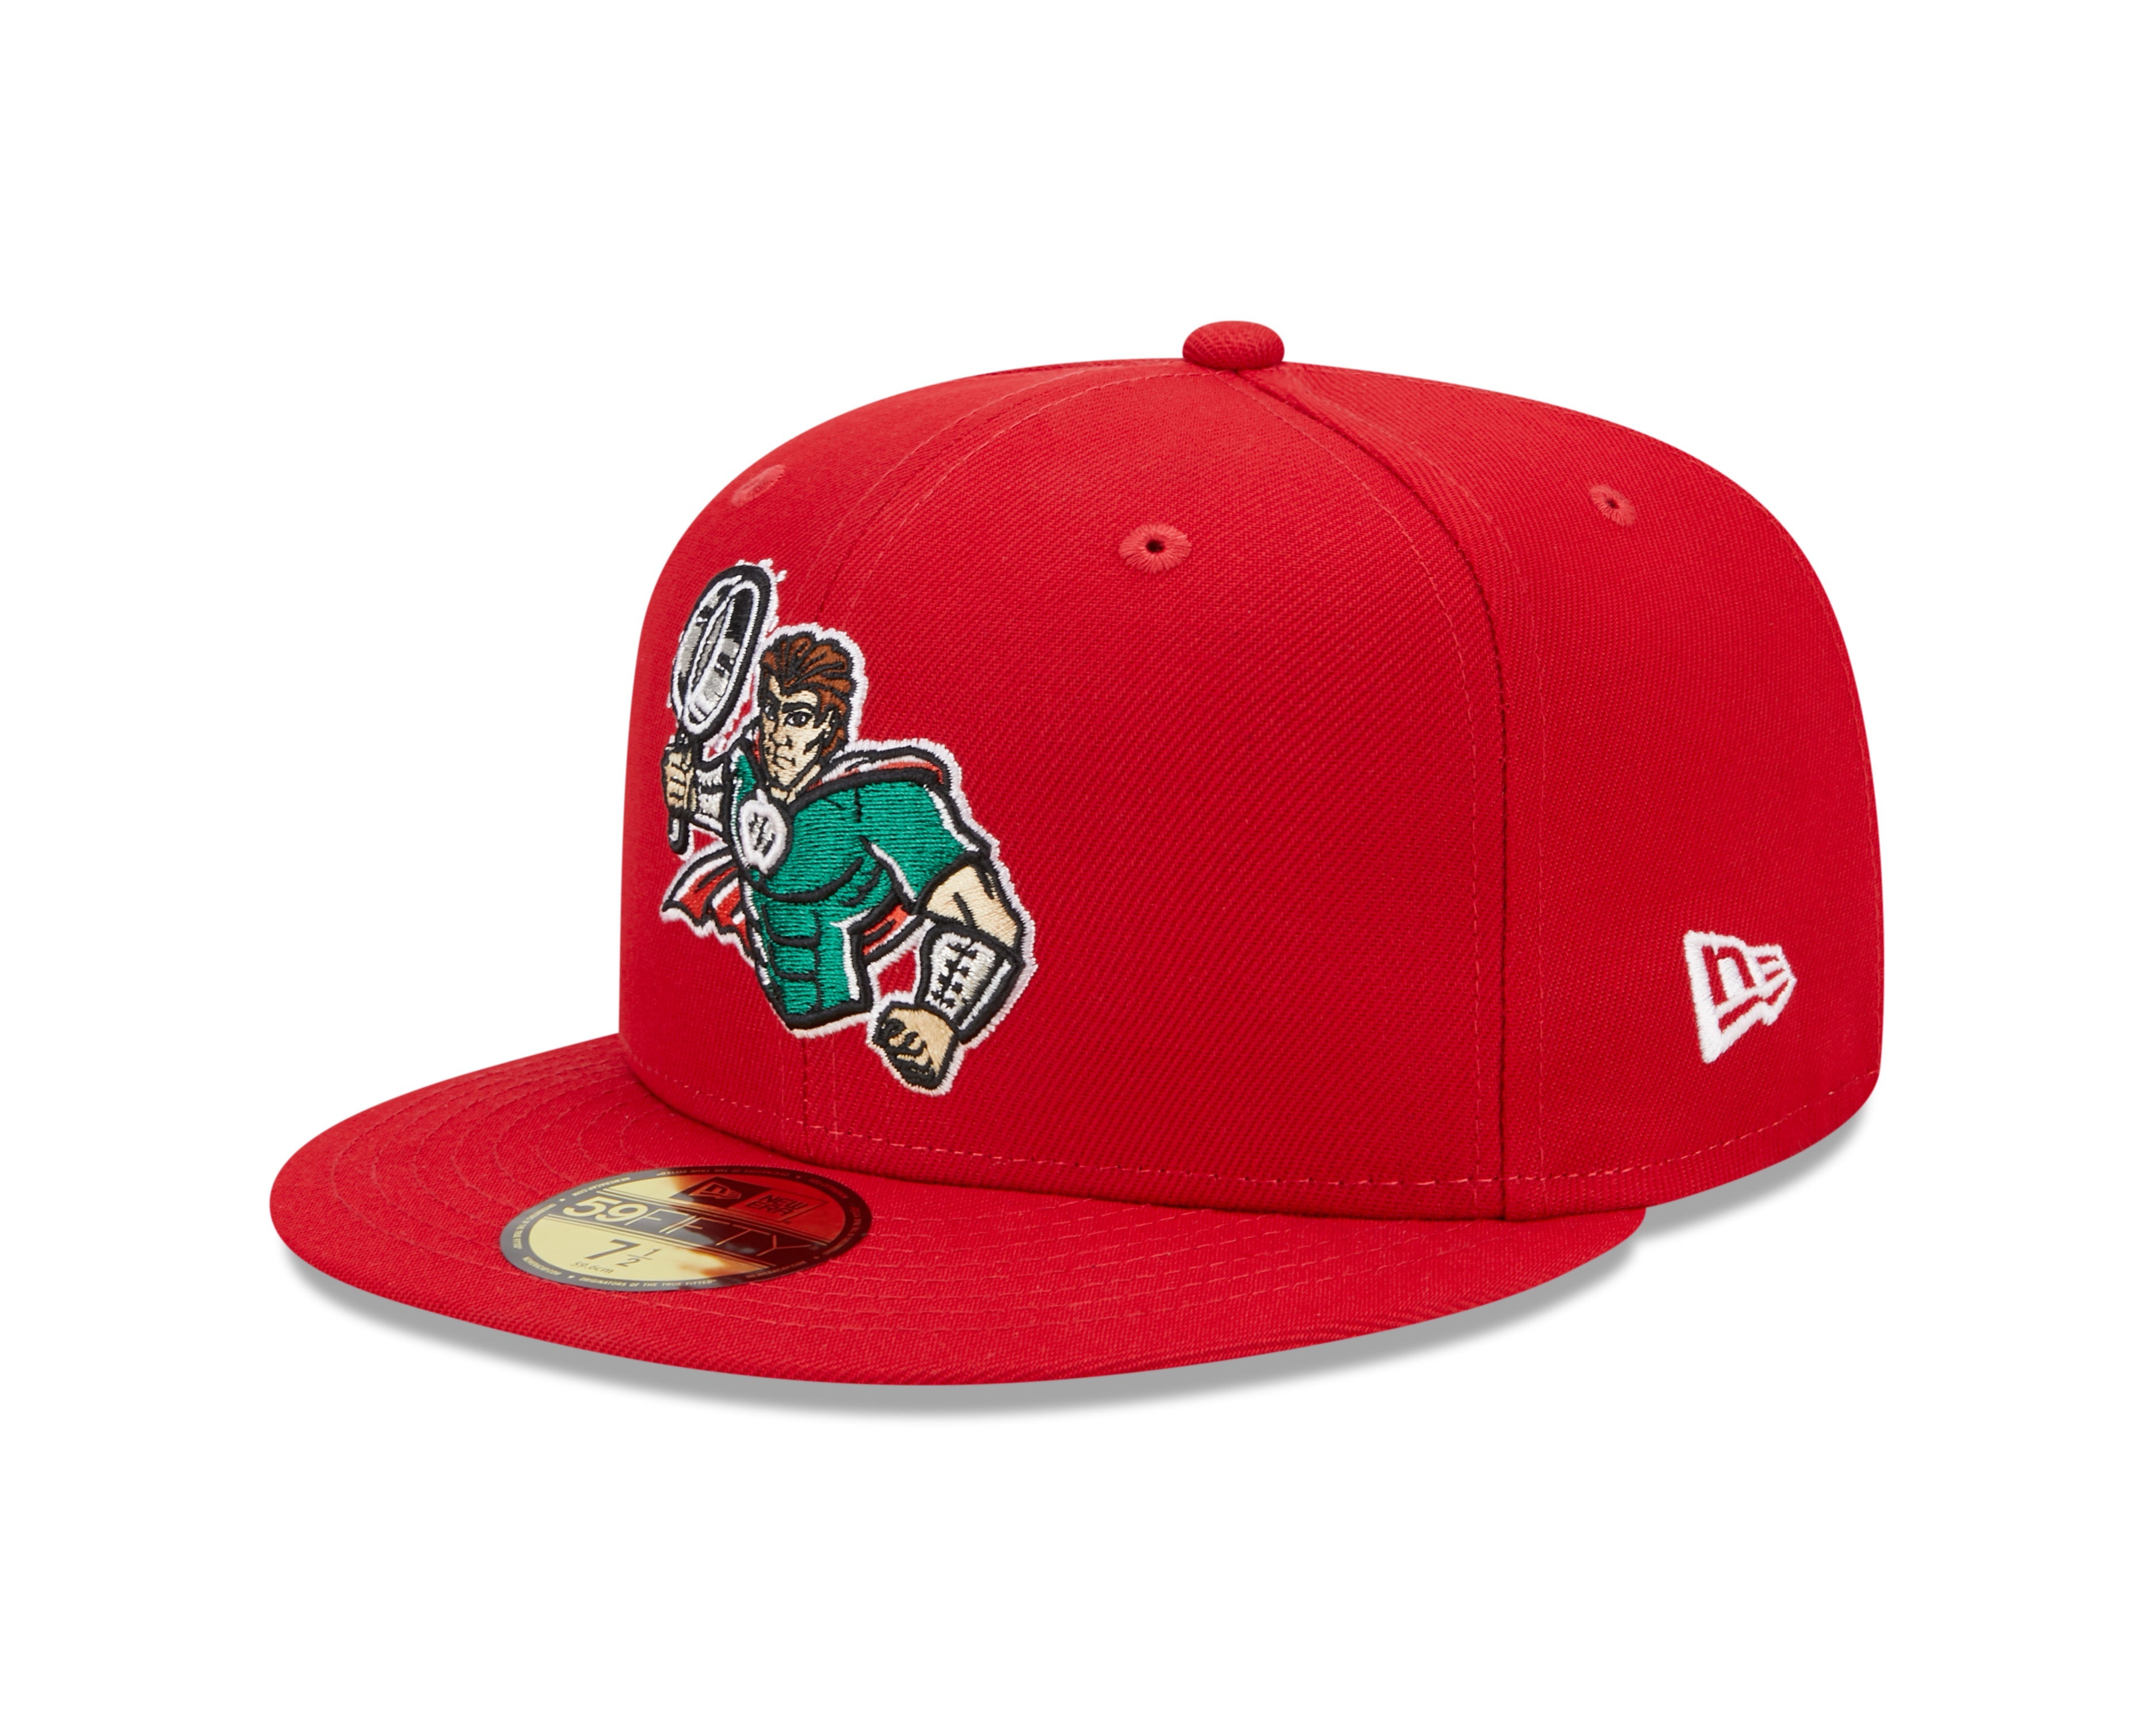 Fort Wayne TinCaps - Today is our Military Appreciation Day & the